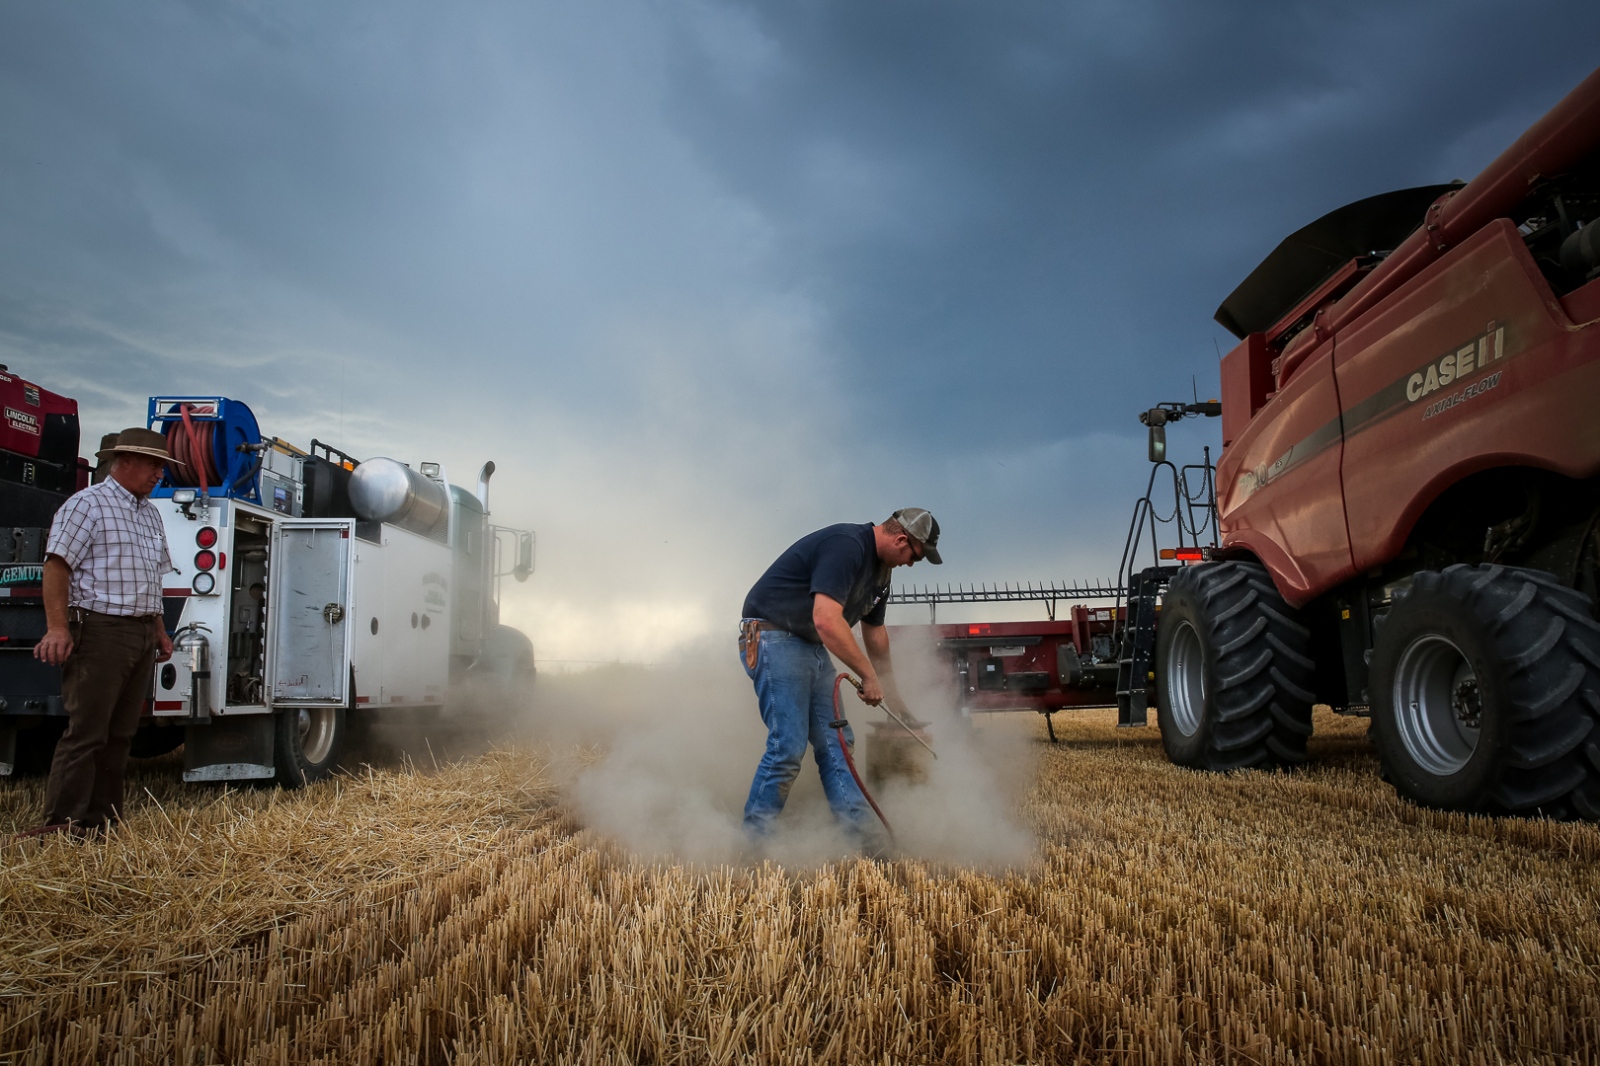 Harvesters -  As a storm brews, Rodney Wolgemuth, 22, cleans a combine...